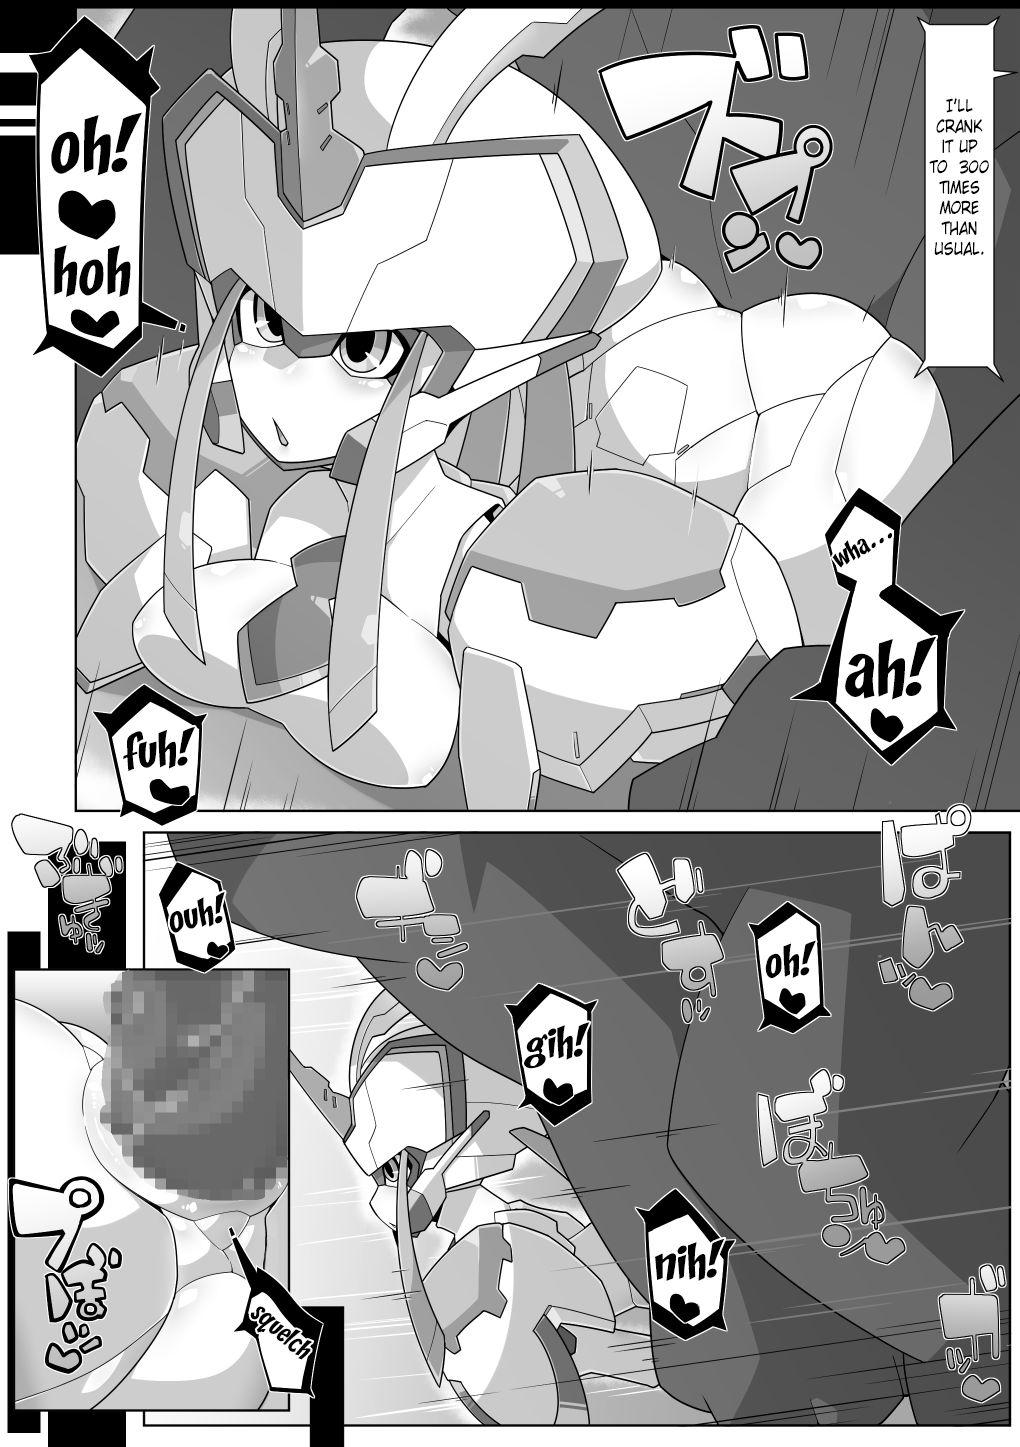 Bisex (C94) [Workaholic (Kni)] robo-hentai-book - Darling in the franxx Amateur Xxx - Page 4